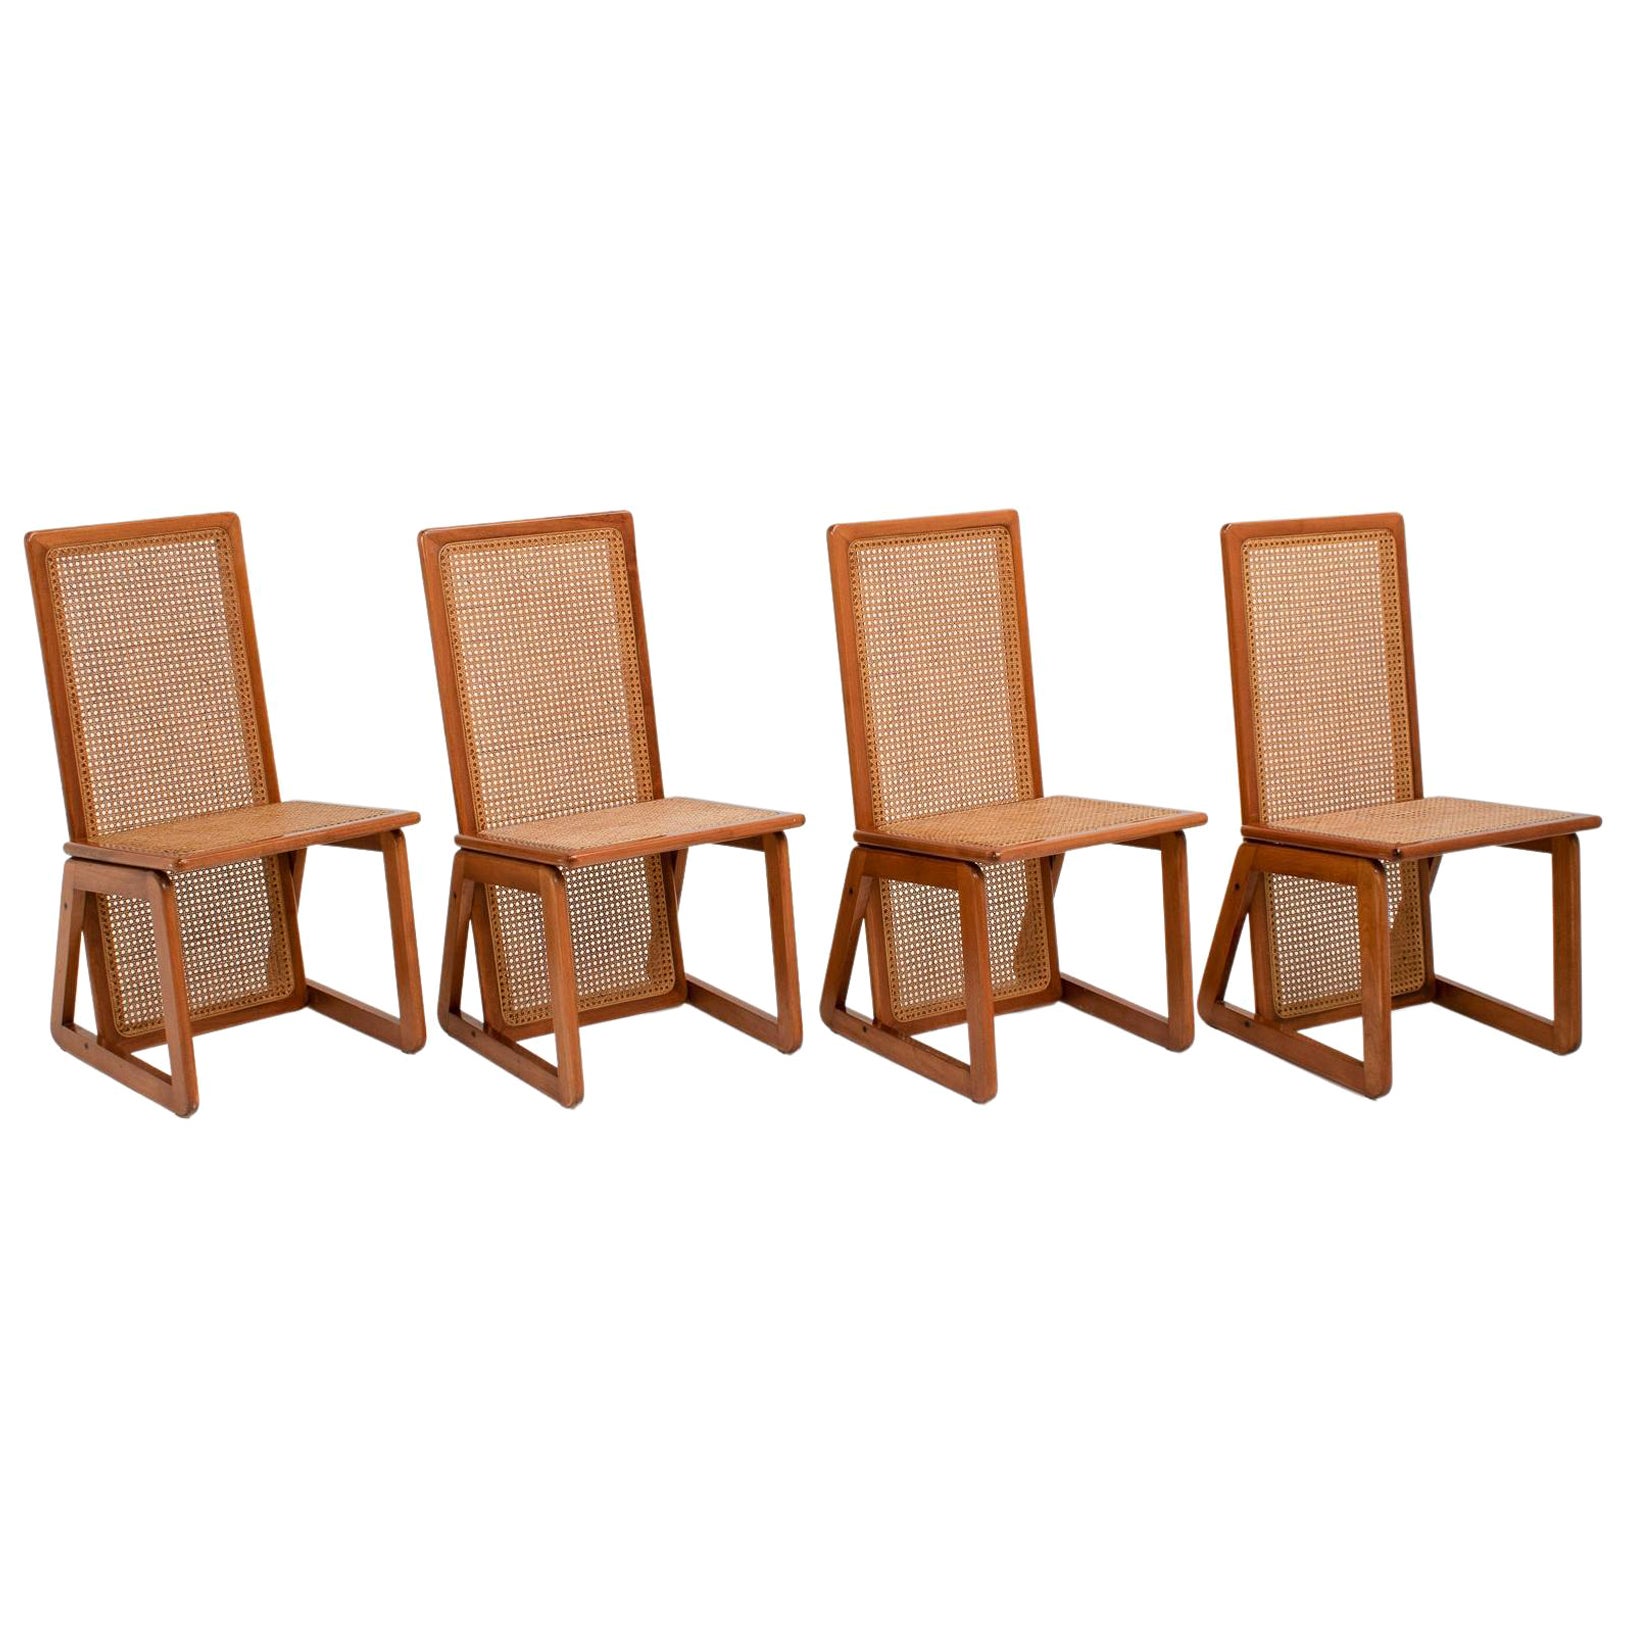 Set of 4 Italian High-Back Dining Chairs in Wood & Cane, 1970s